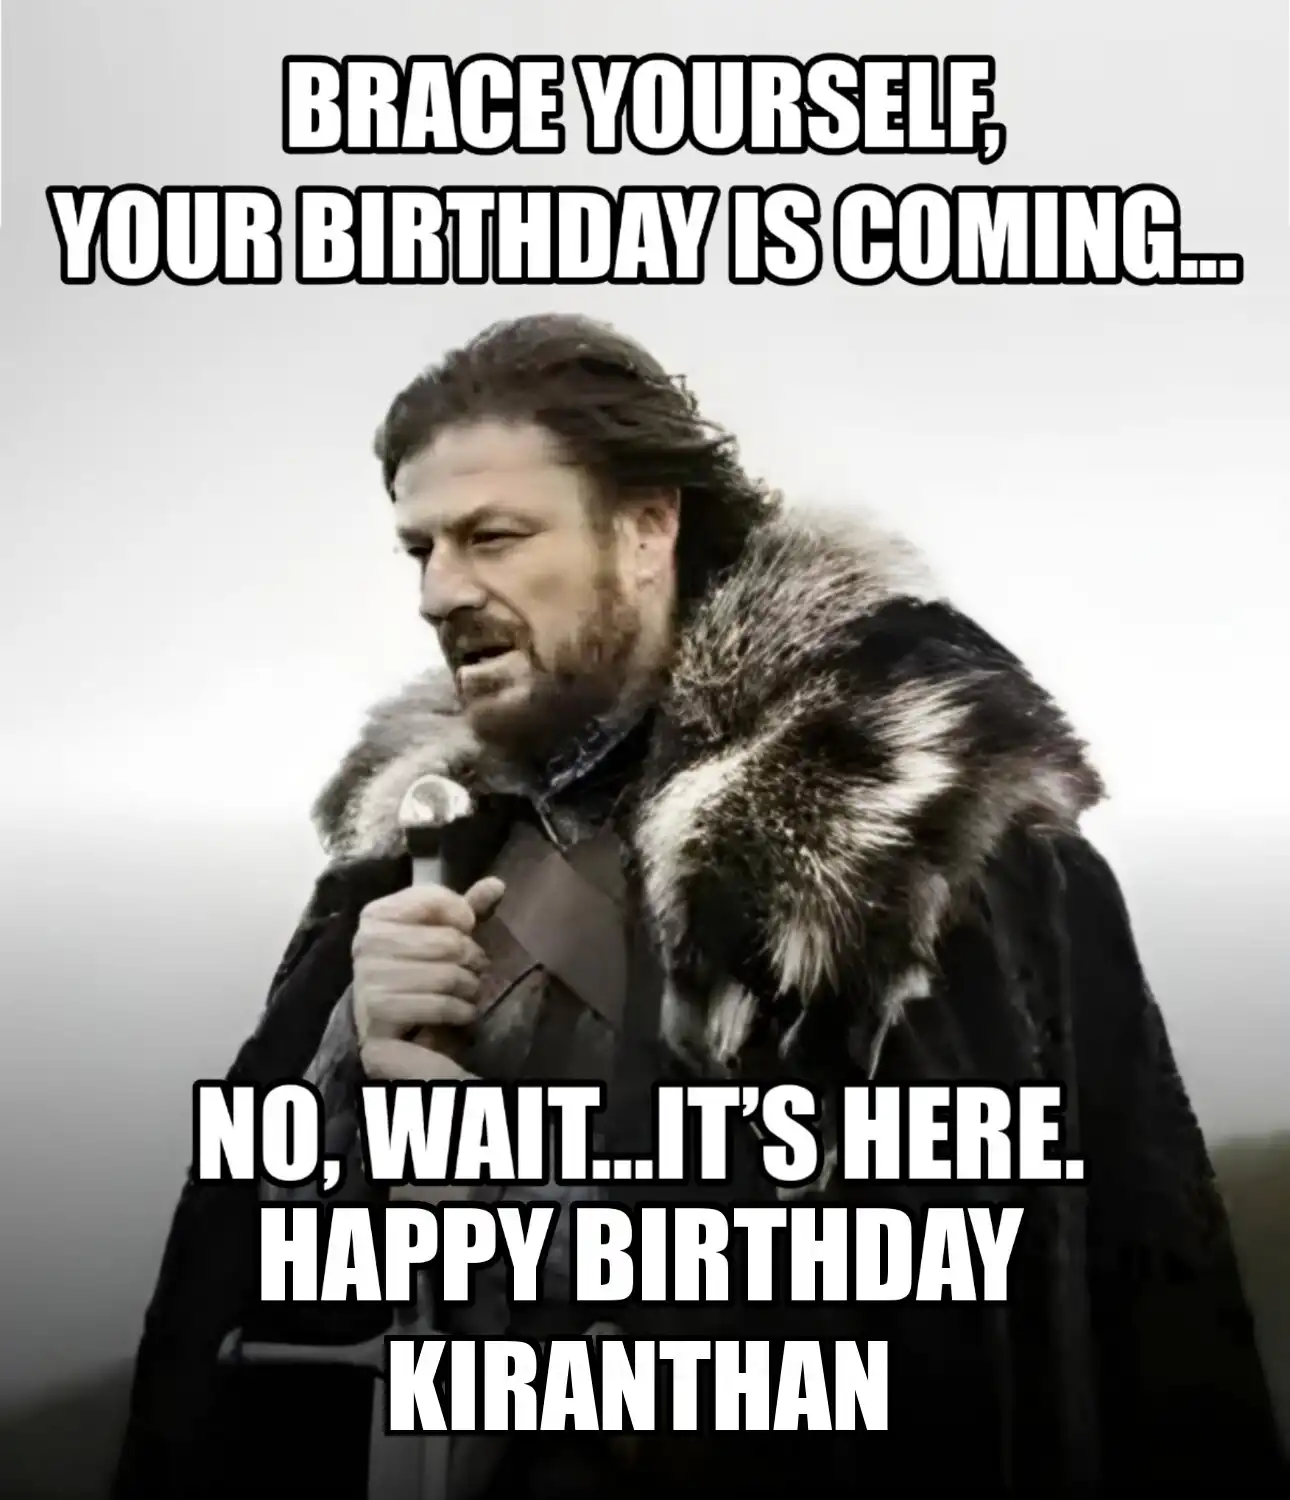 Happy Birthday Kiranthan Brace Yourself Your Birthday Is Coming Meme